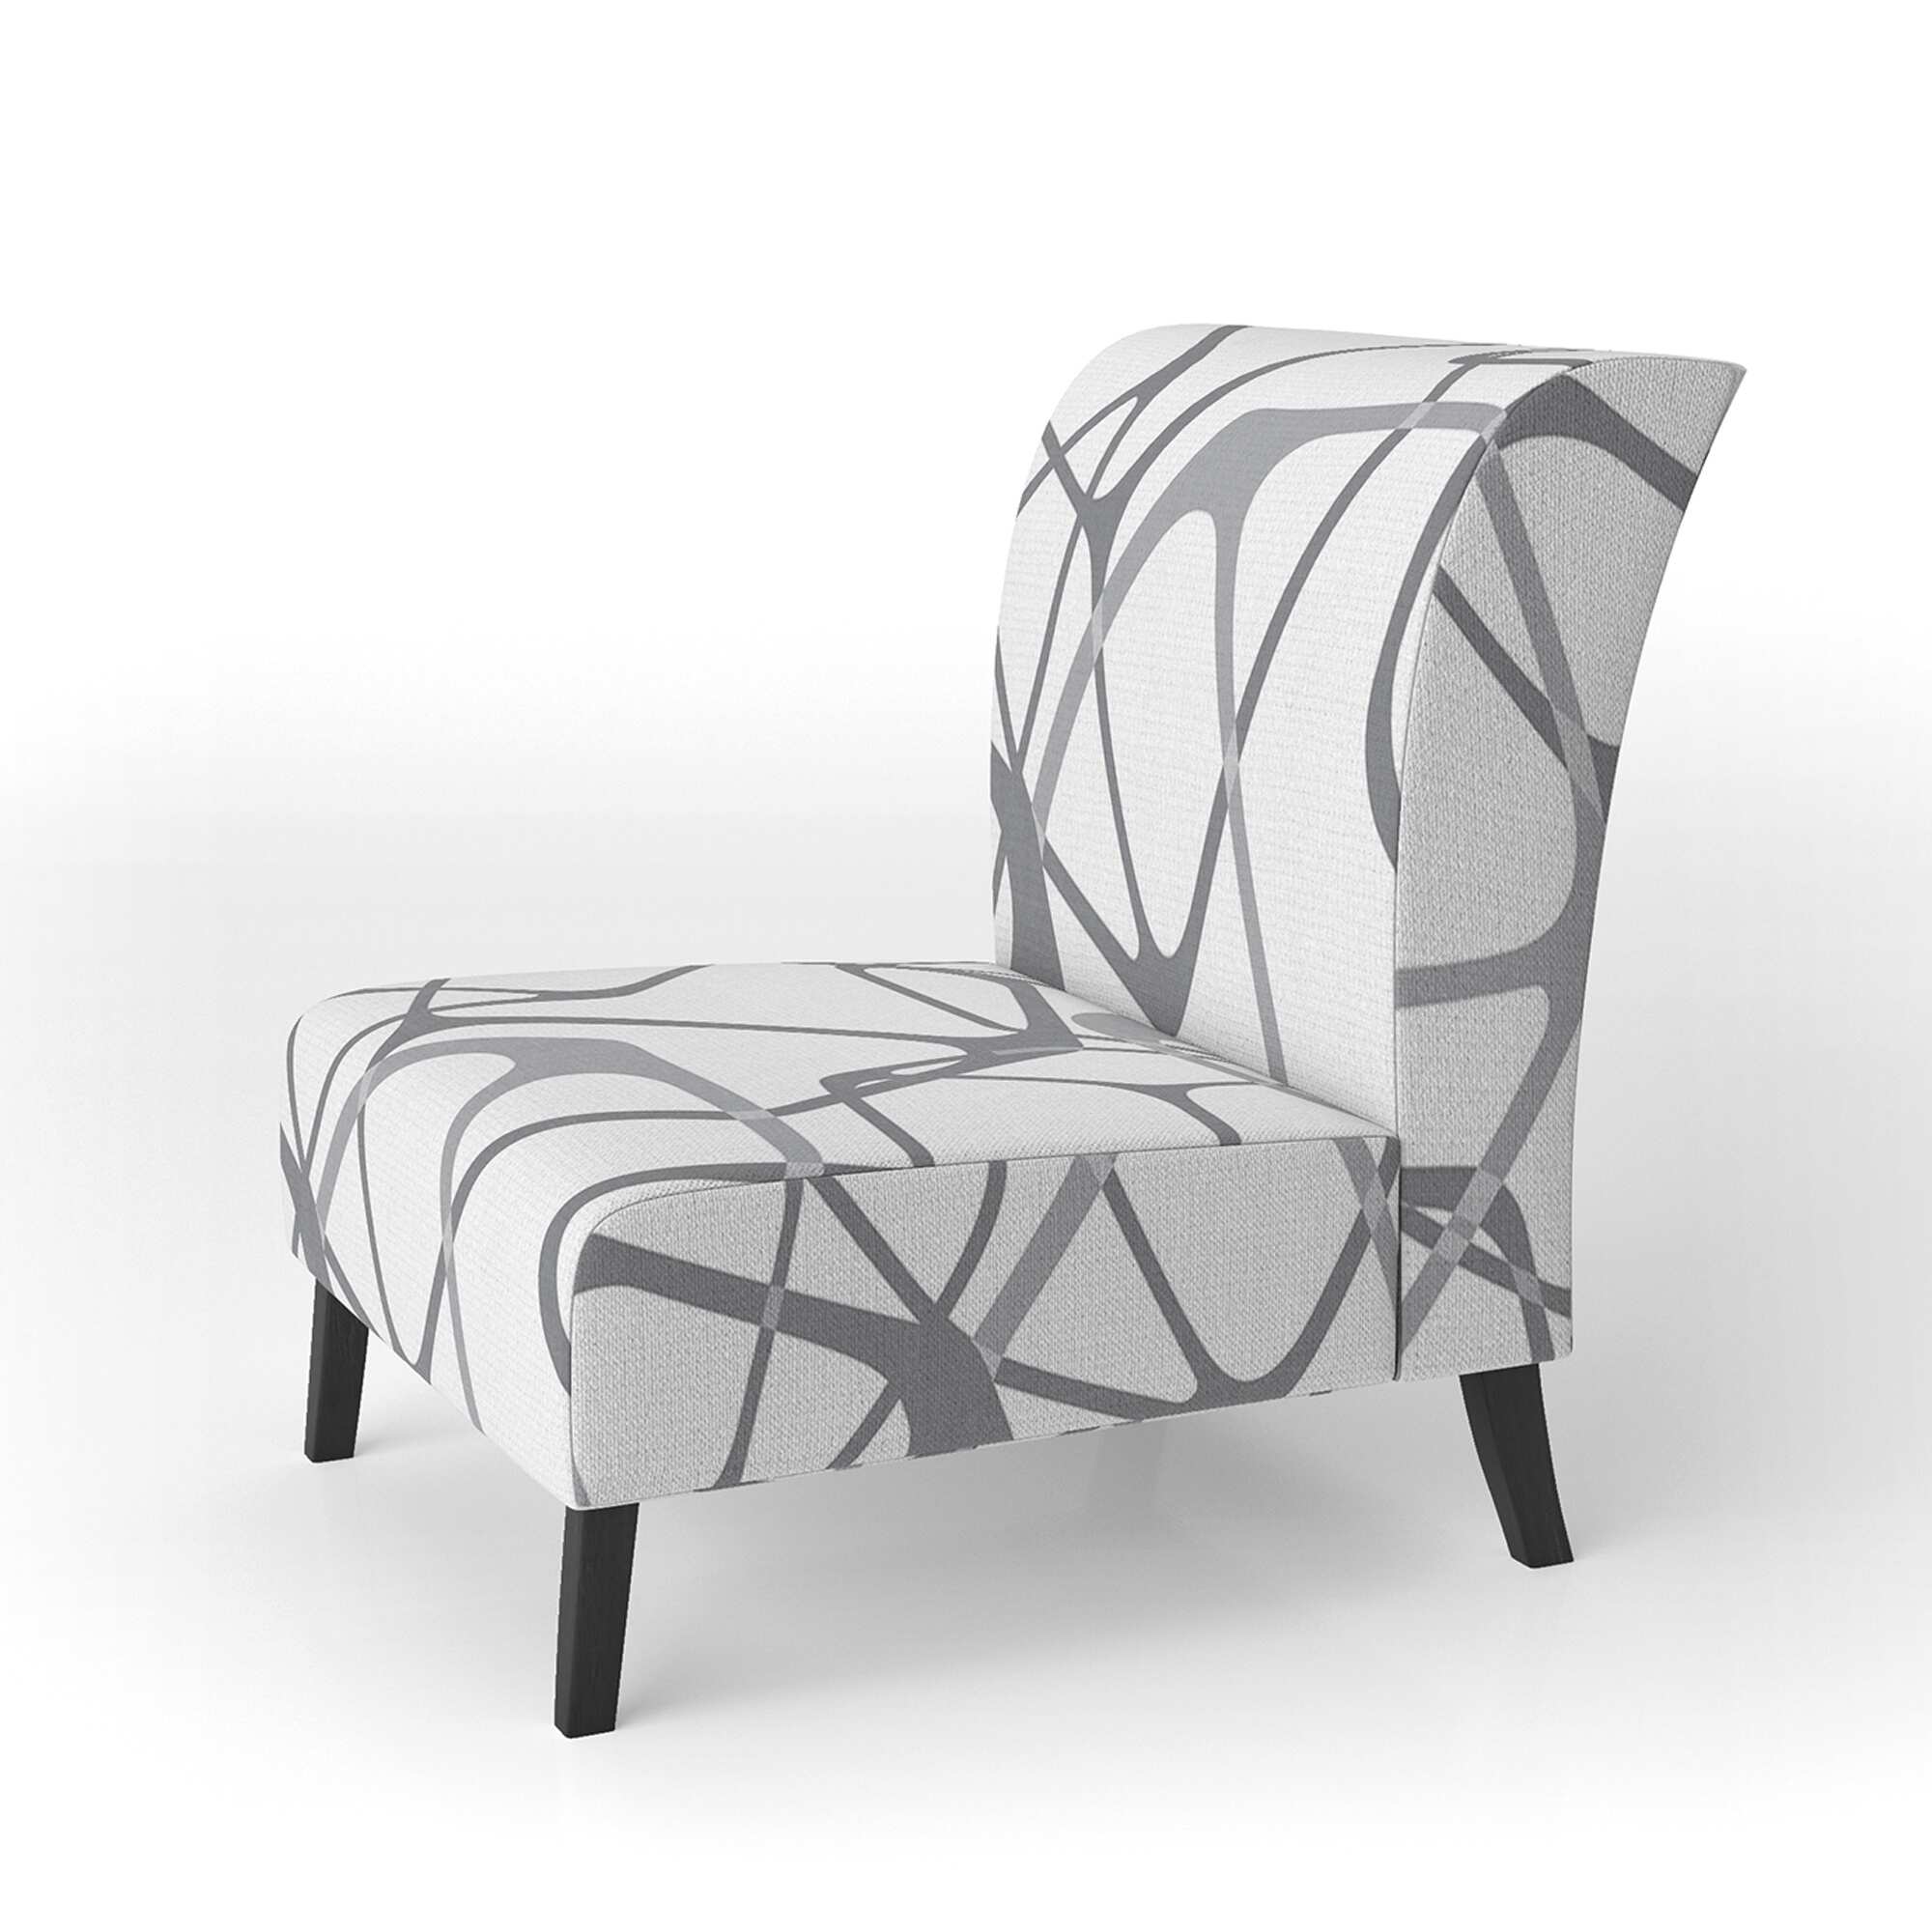 Designart "Abstract Vector Grey Element" Upholstered Patterned Accent Chair and Arm Chair